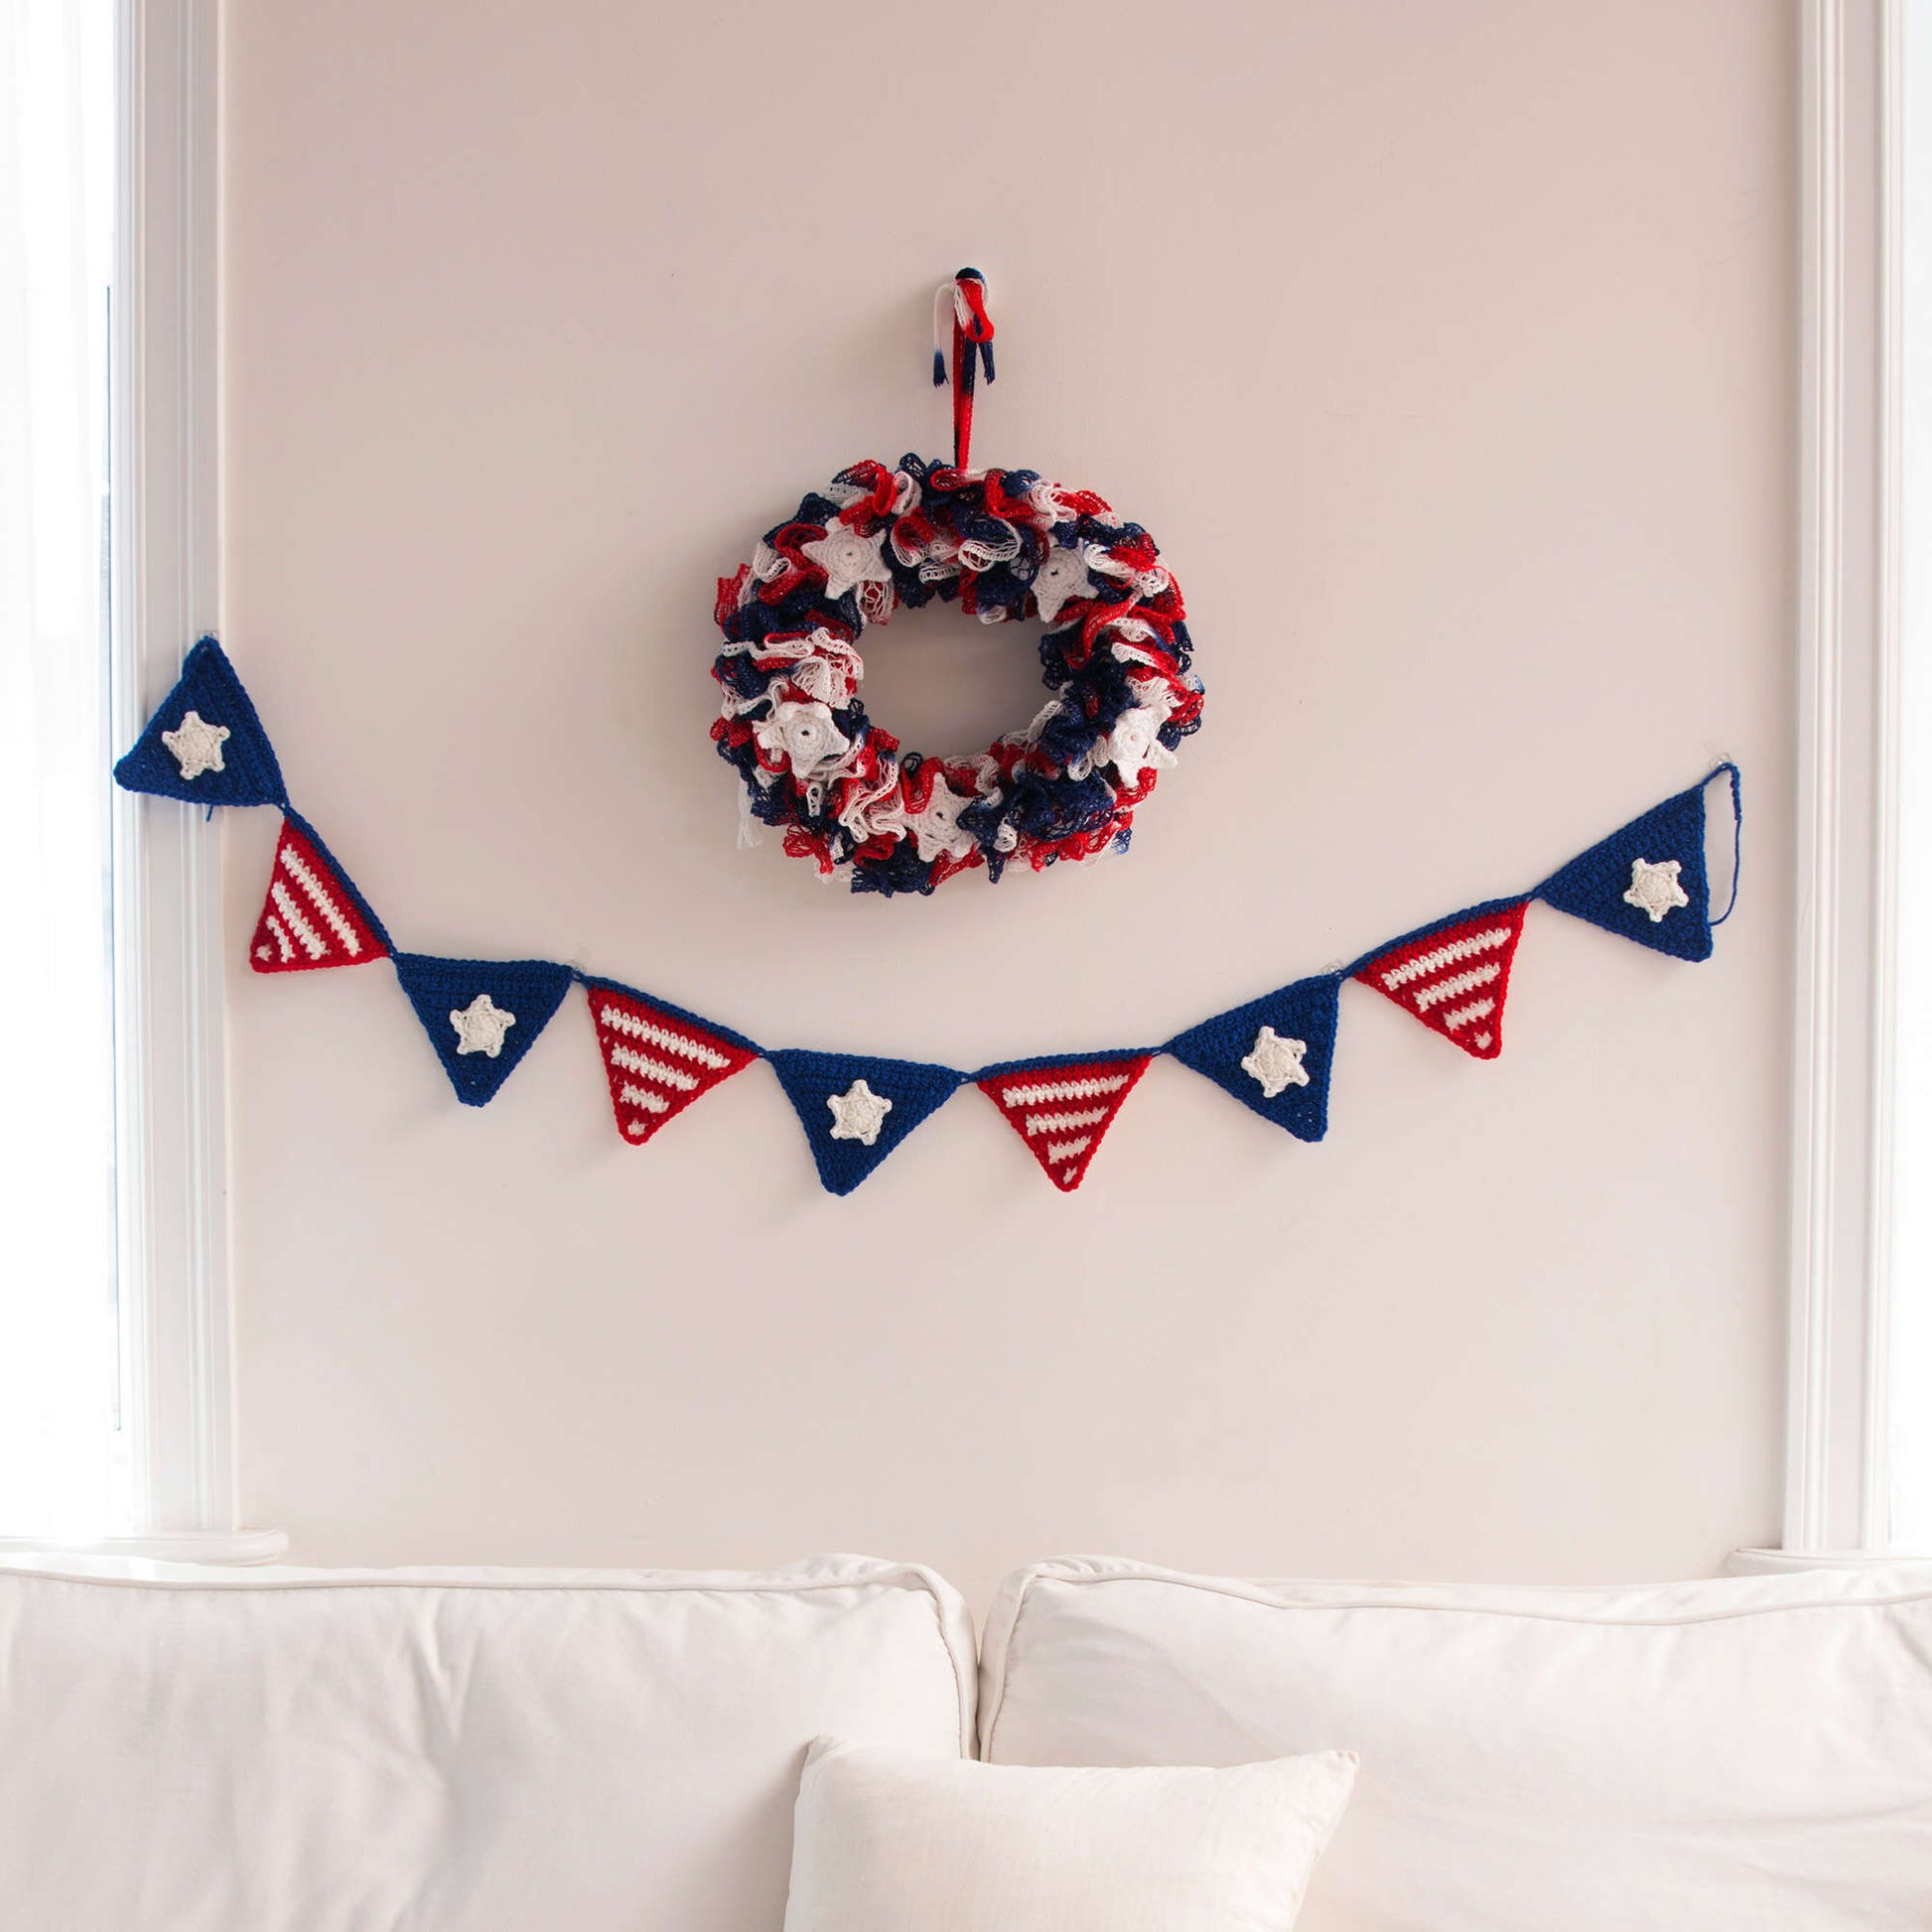 Free Red Heart Crochet Patriotic Party Banner Pattern